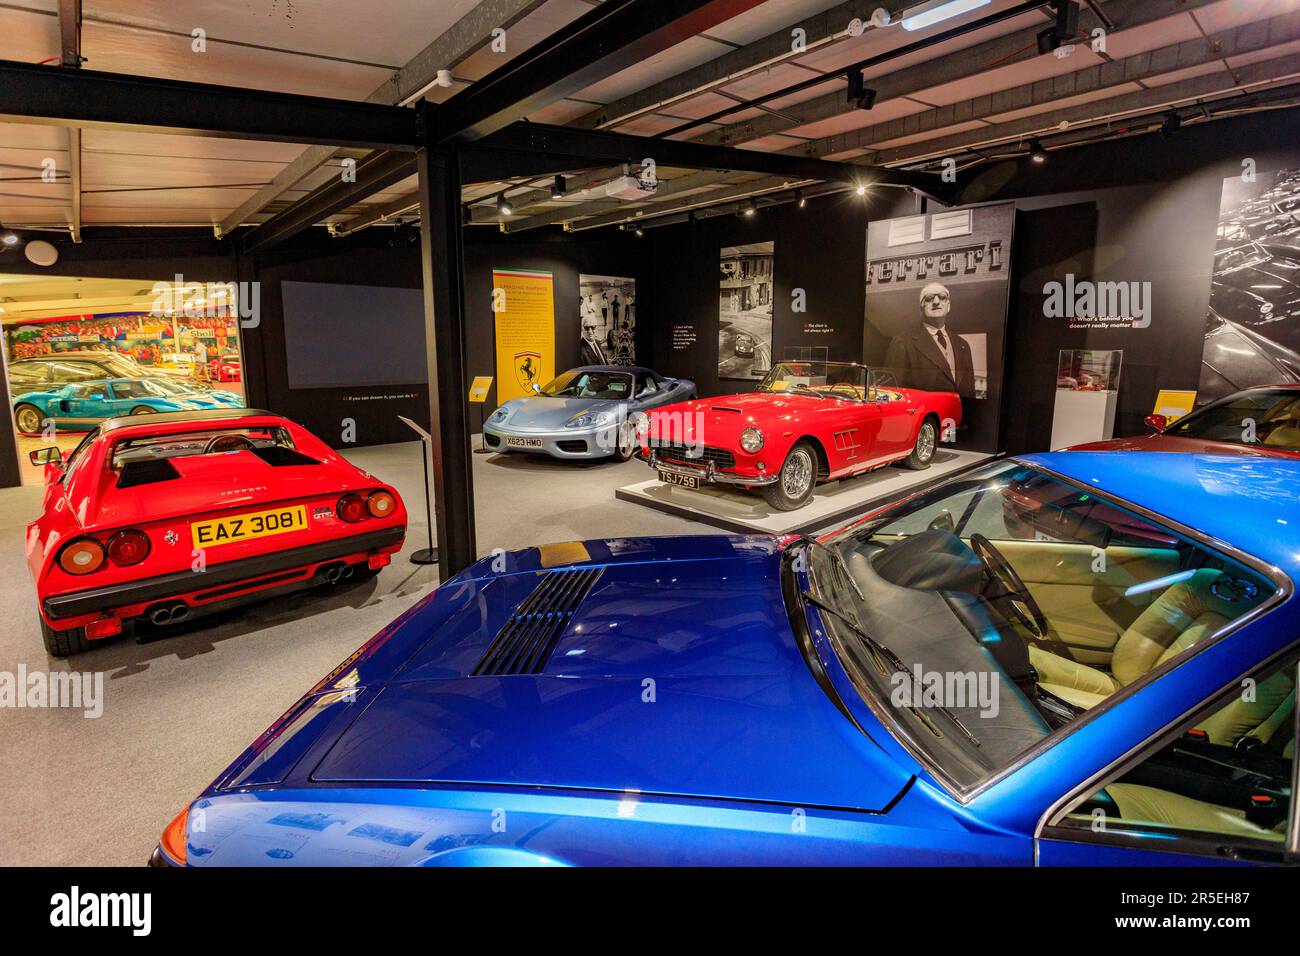 A sleek and colourful selection of Ferraris in the Ferrari Room at the Haynes International Motor Museum, Sparkford, Somerset, UK Stock Photo